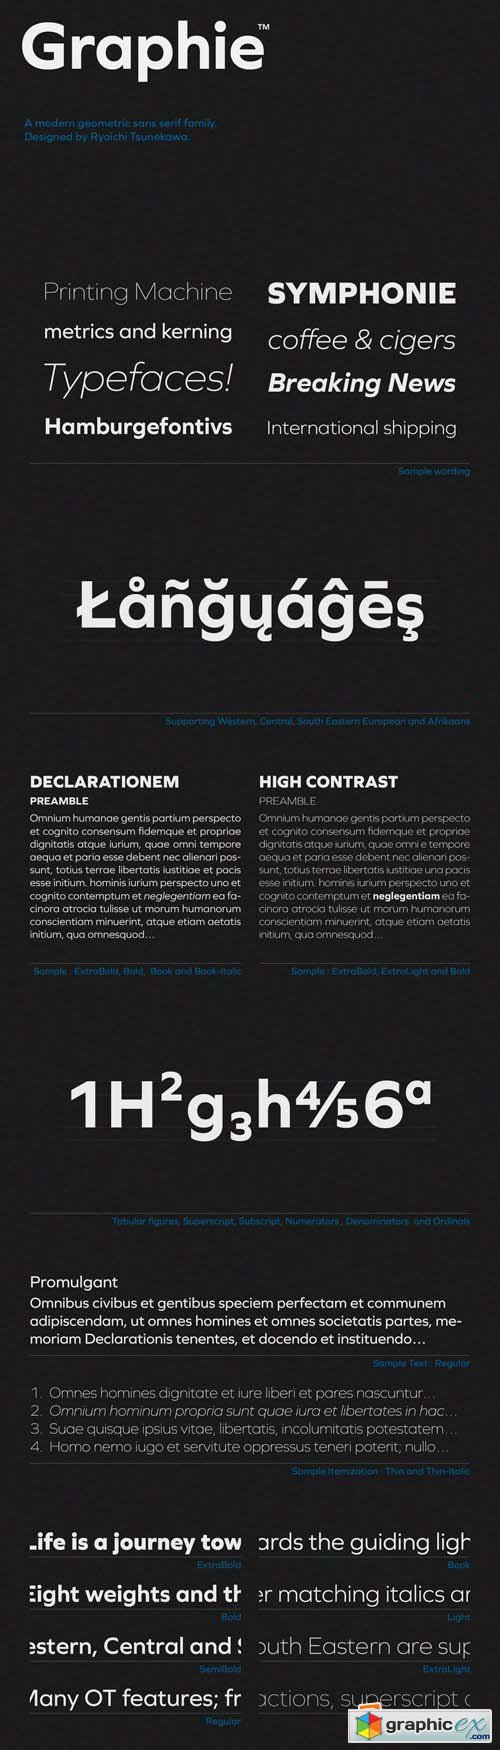 Graphie Font Family - 16 Fonts for $300